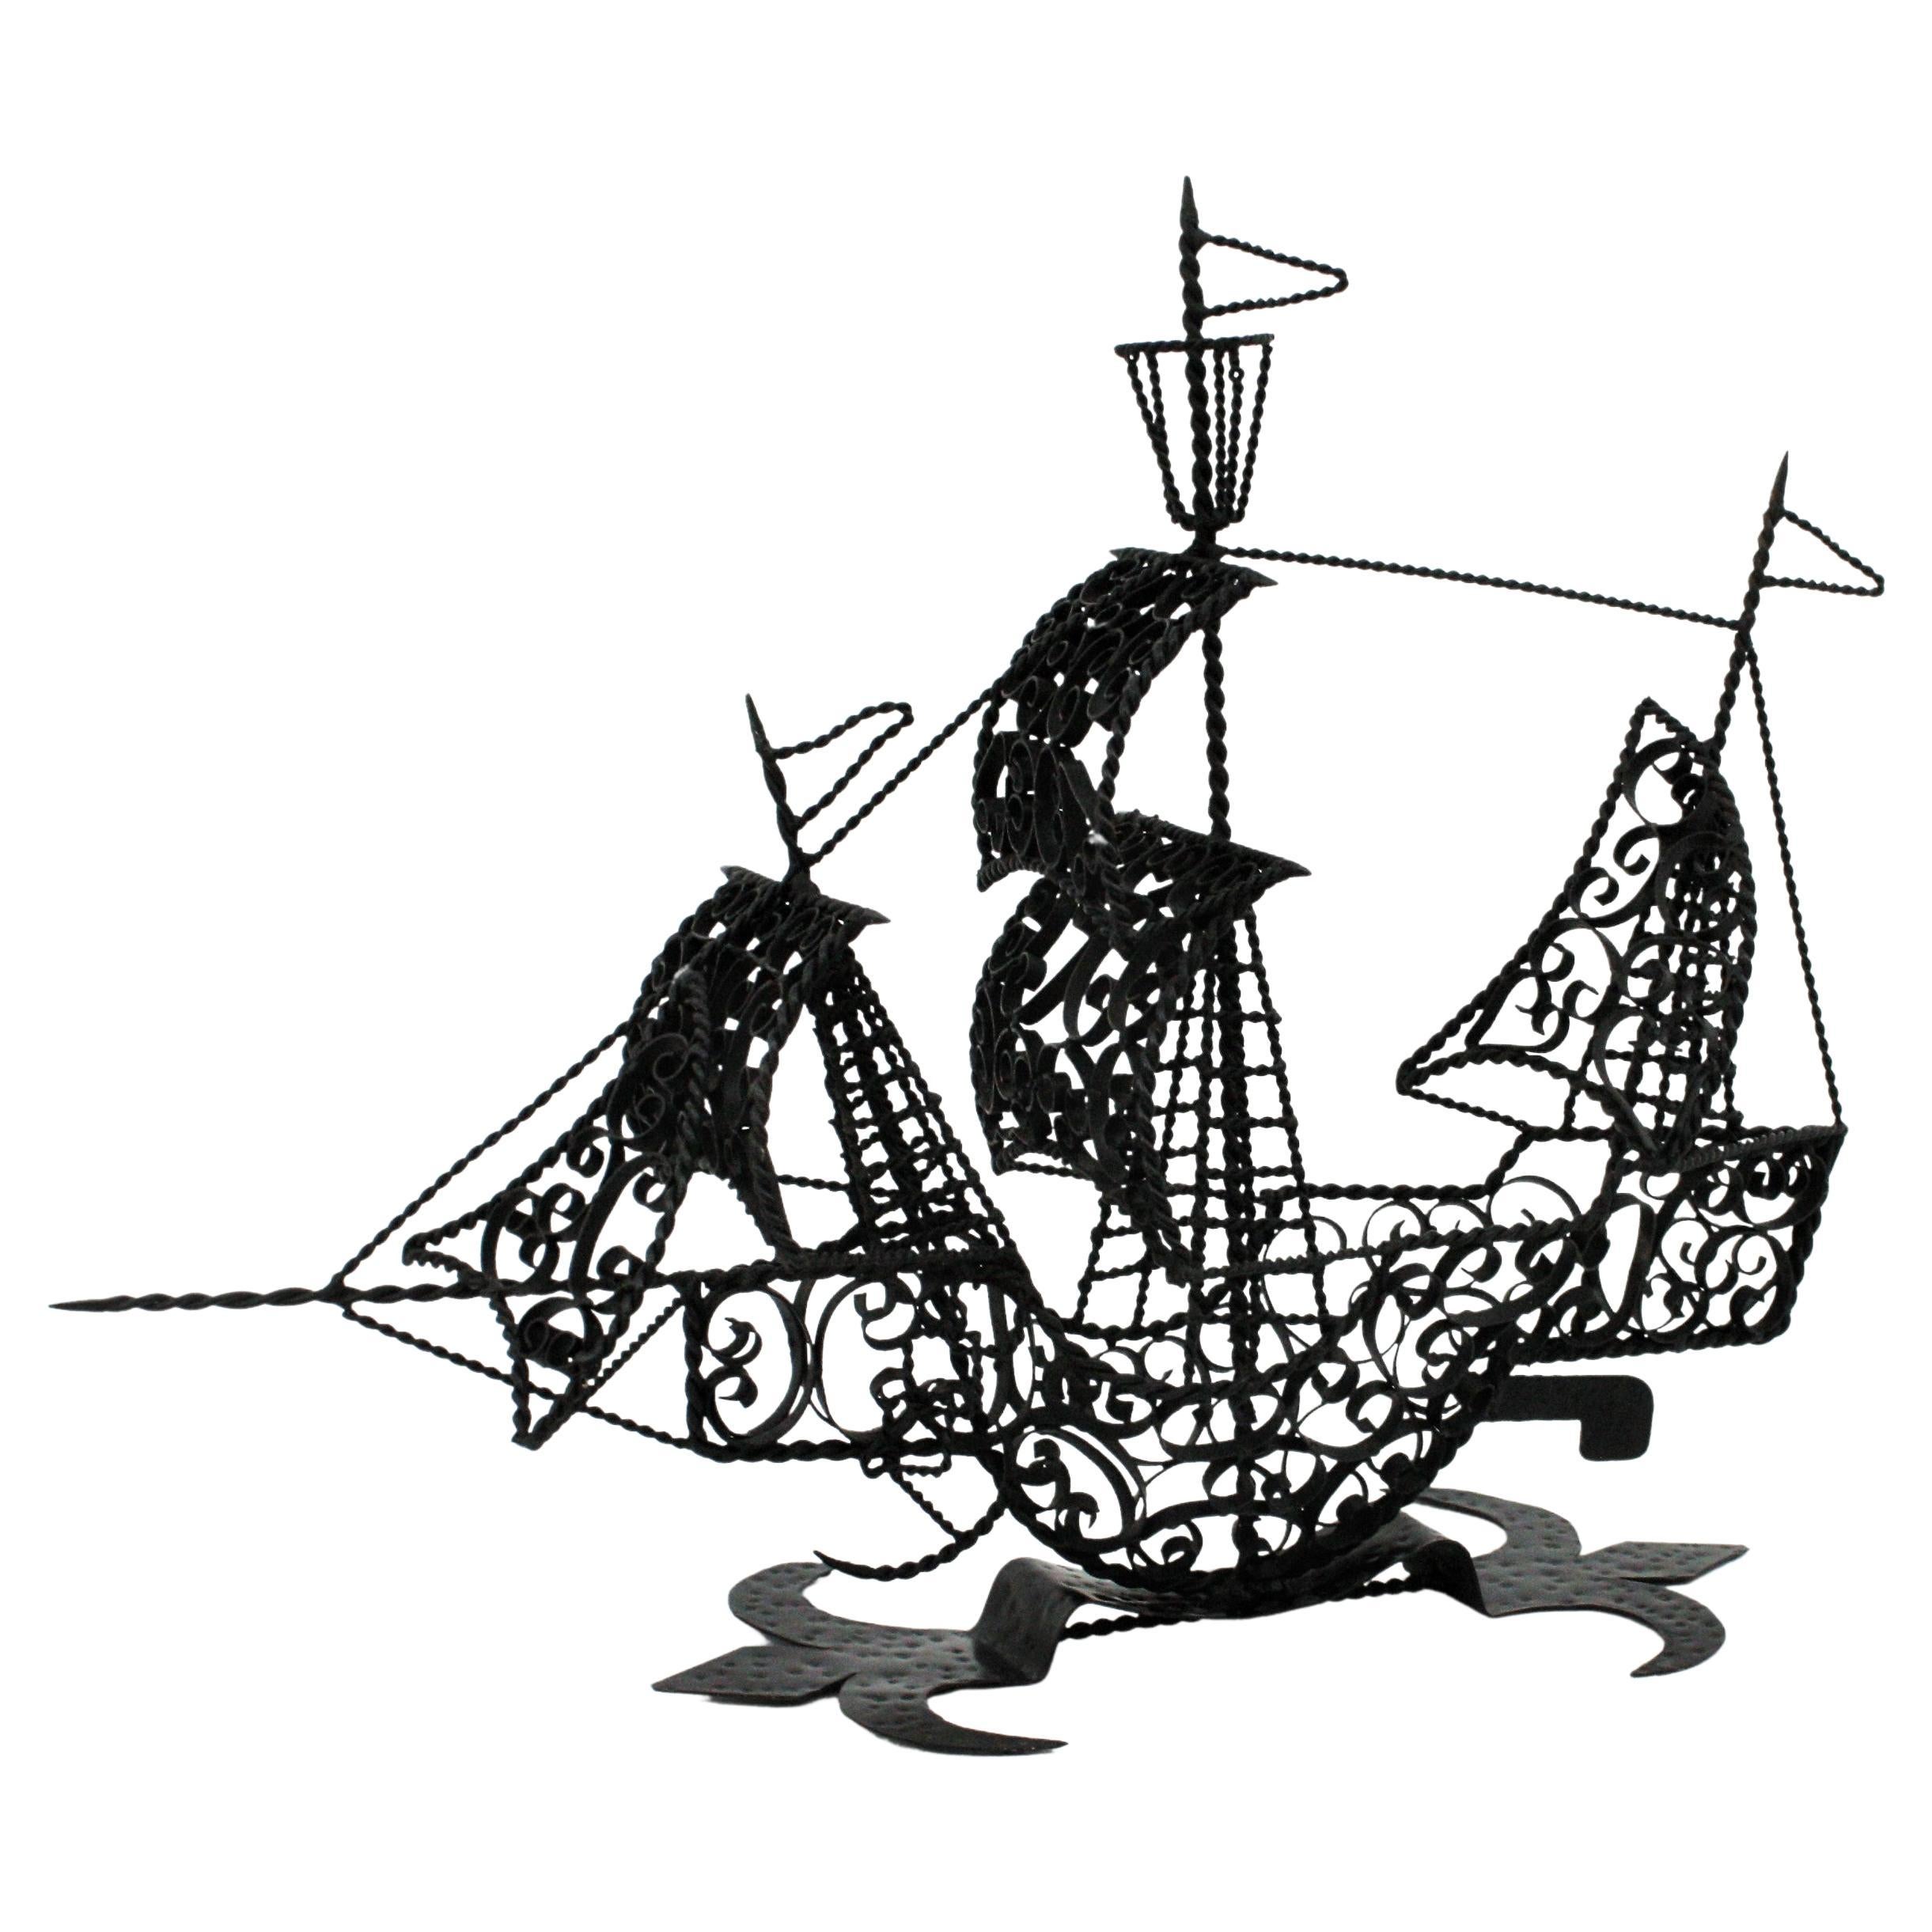 Wrought iron Spanish caravel boat / galleon sculpture. Spain, 1940s-1950s
This sailing ship sculpture was handcrafted in Spain at the mid-20th century period. The ship has a richly detailed scrollwork, iron work with twisted wires. It stands up on a